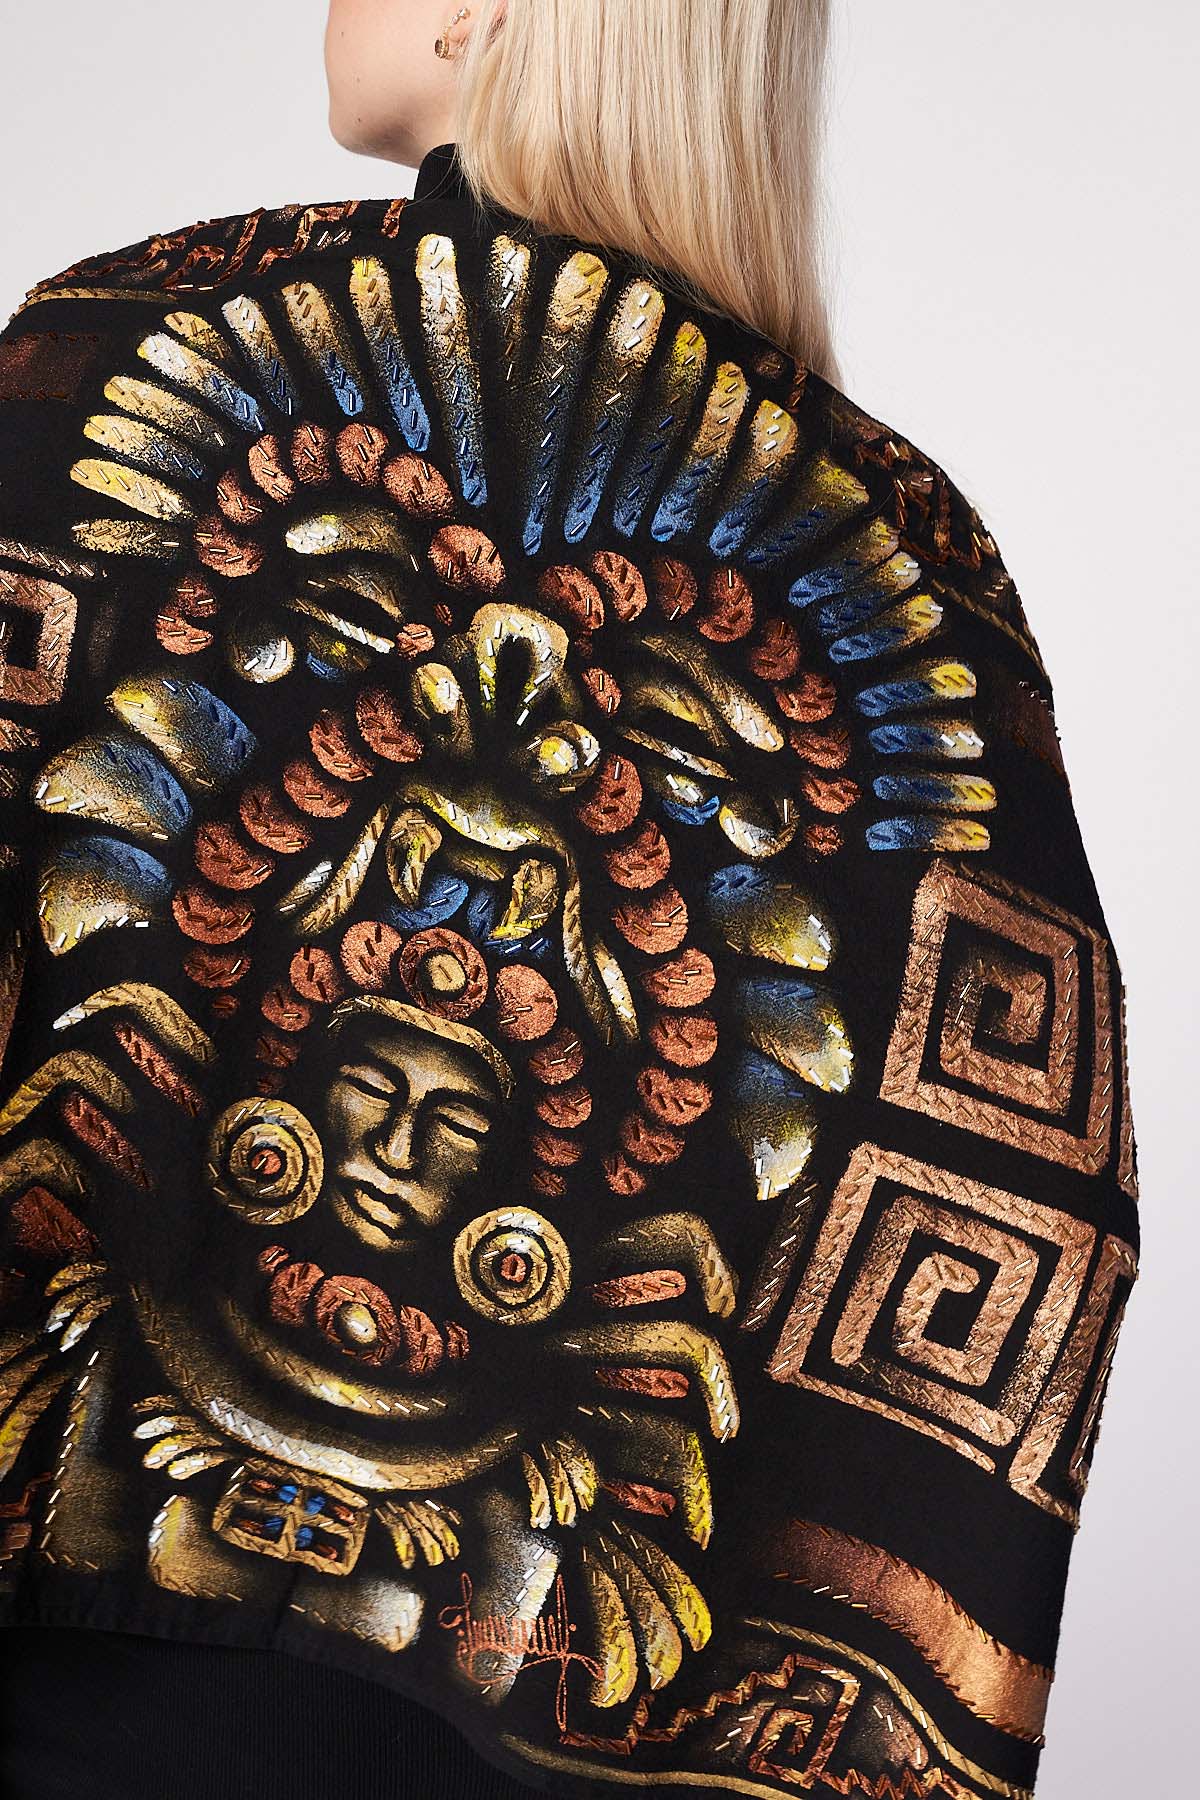 HAND-PAINTED AND HAND-EMBROIDERED SHAWL WITH BEADED FRINGE - GUERREROS